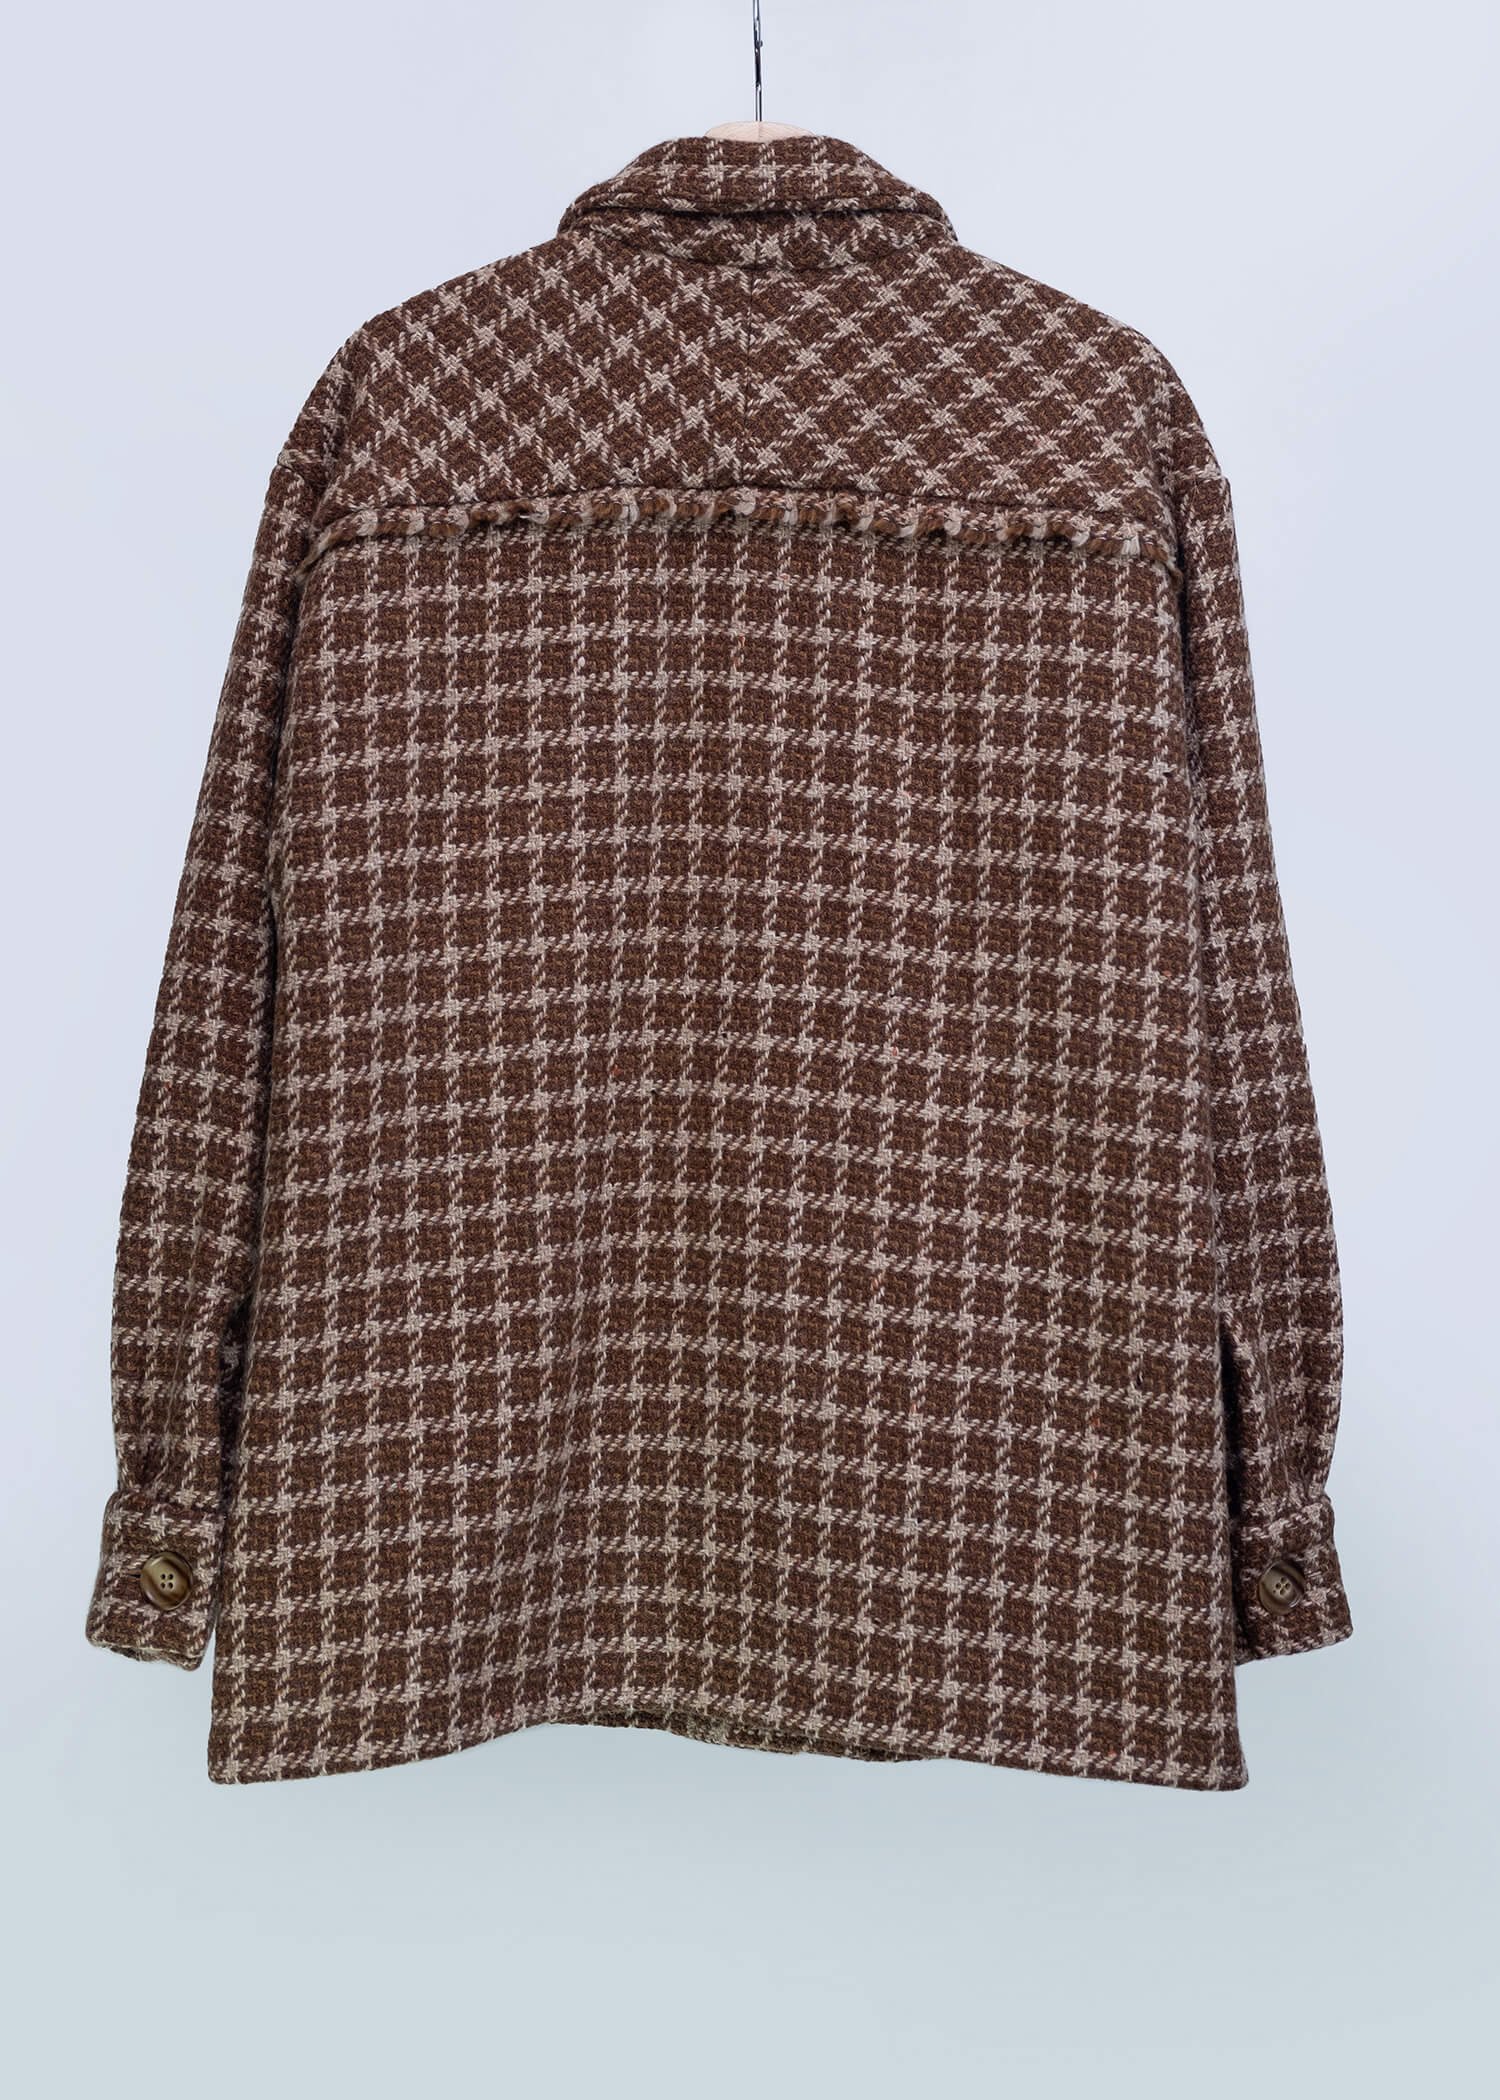 Men’s Chocolate and Oatmeal Check Over Shirt by Order Materia — Order ...